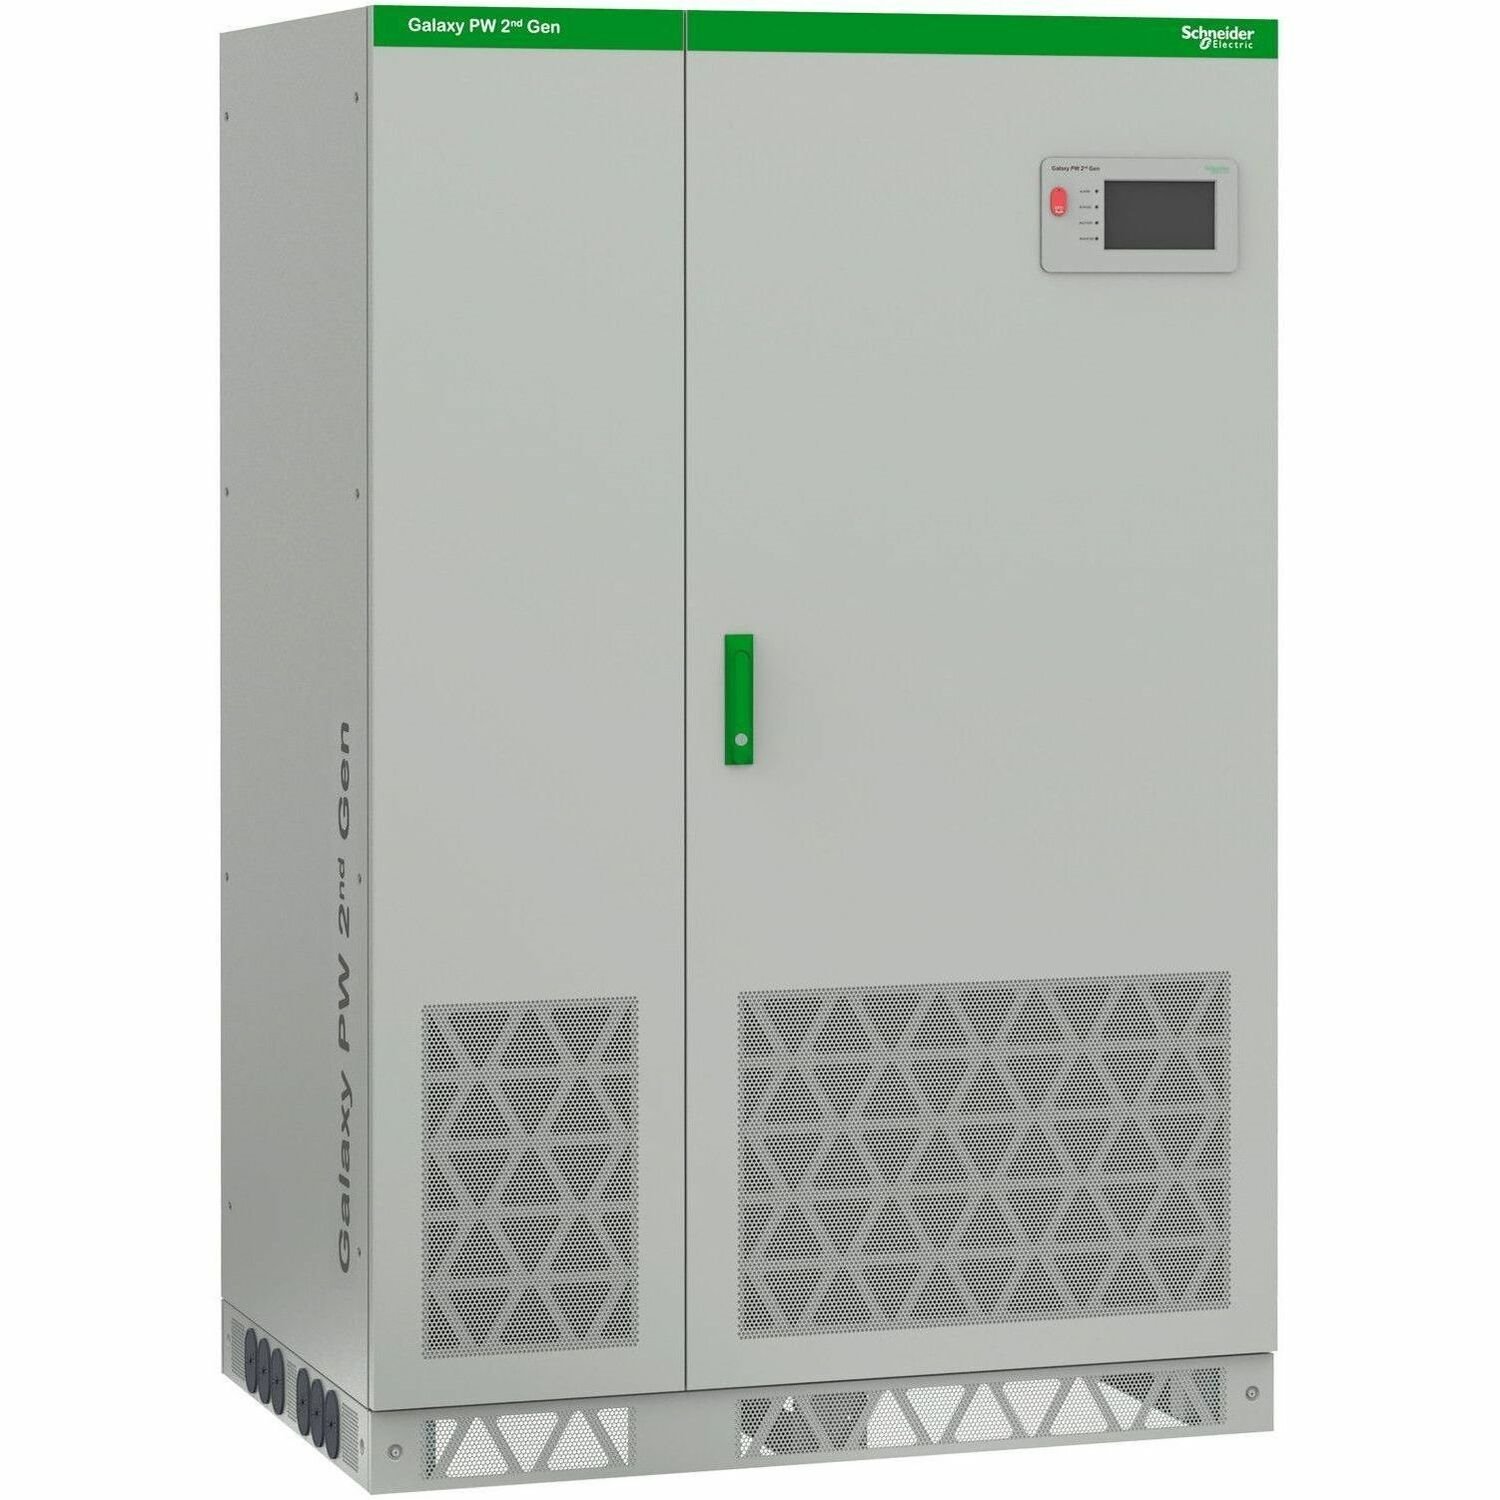 APC by Schneider Electric Galaxy PW 2nd Gen Double Conversion Online UPS - 60 kVA/48 kW - Three Phase